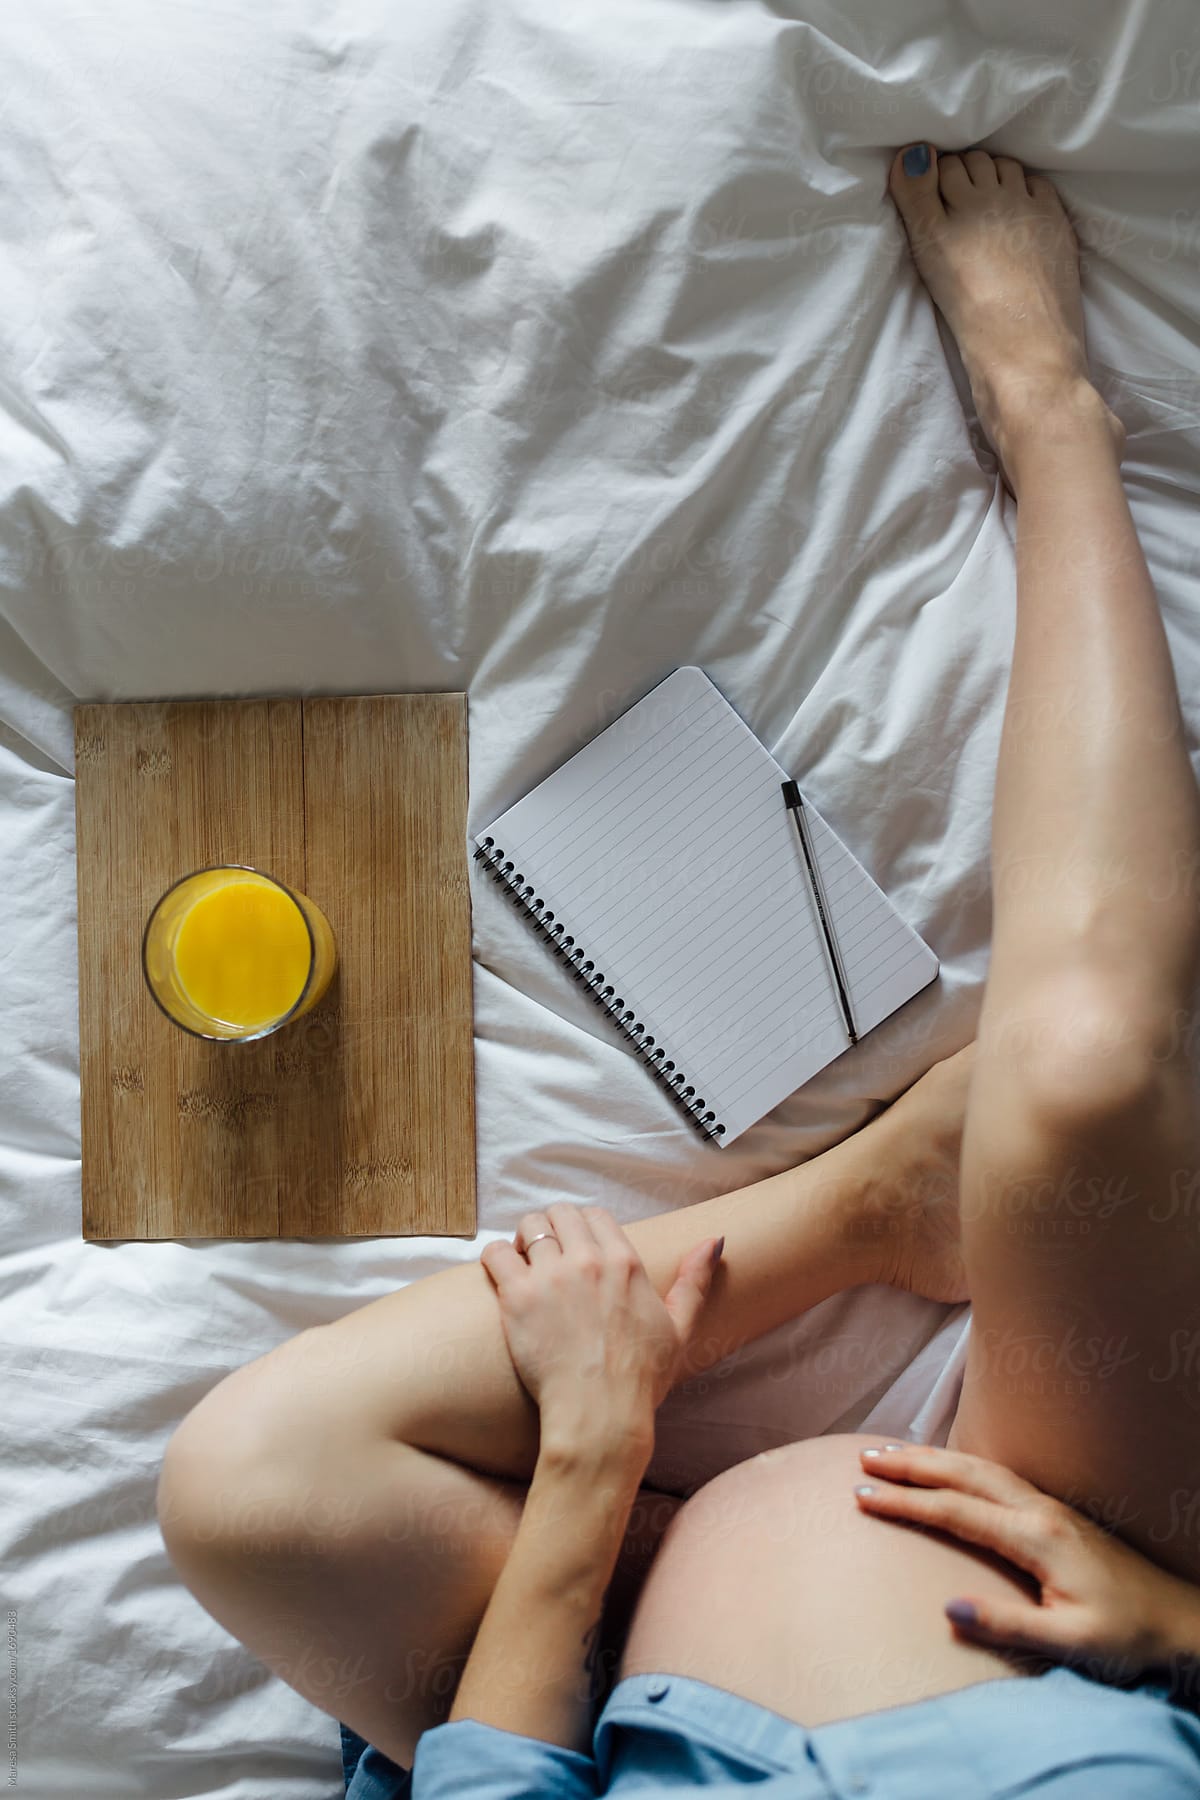 A pregnant women's bare legs and tummy from above. A glass of orange juice and a blank notebook are on the white sheeted bed.